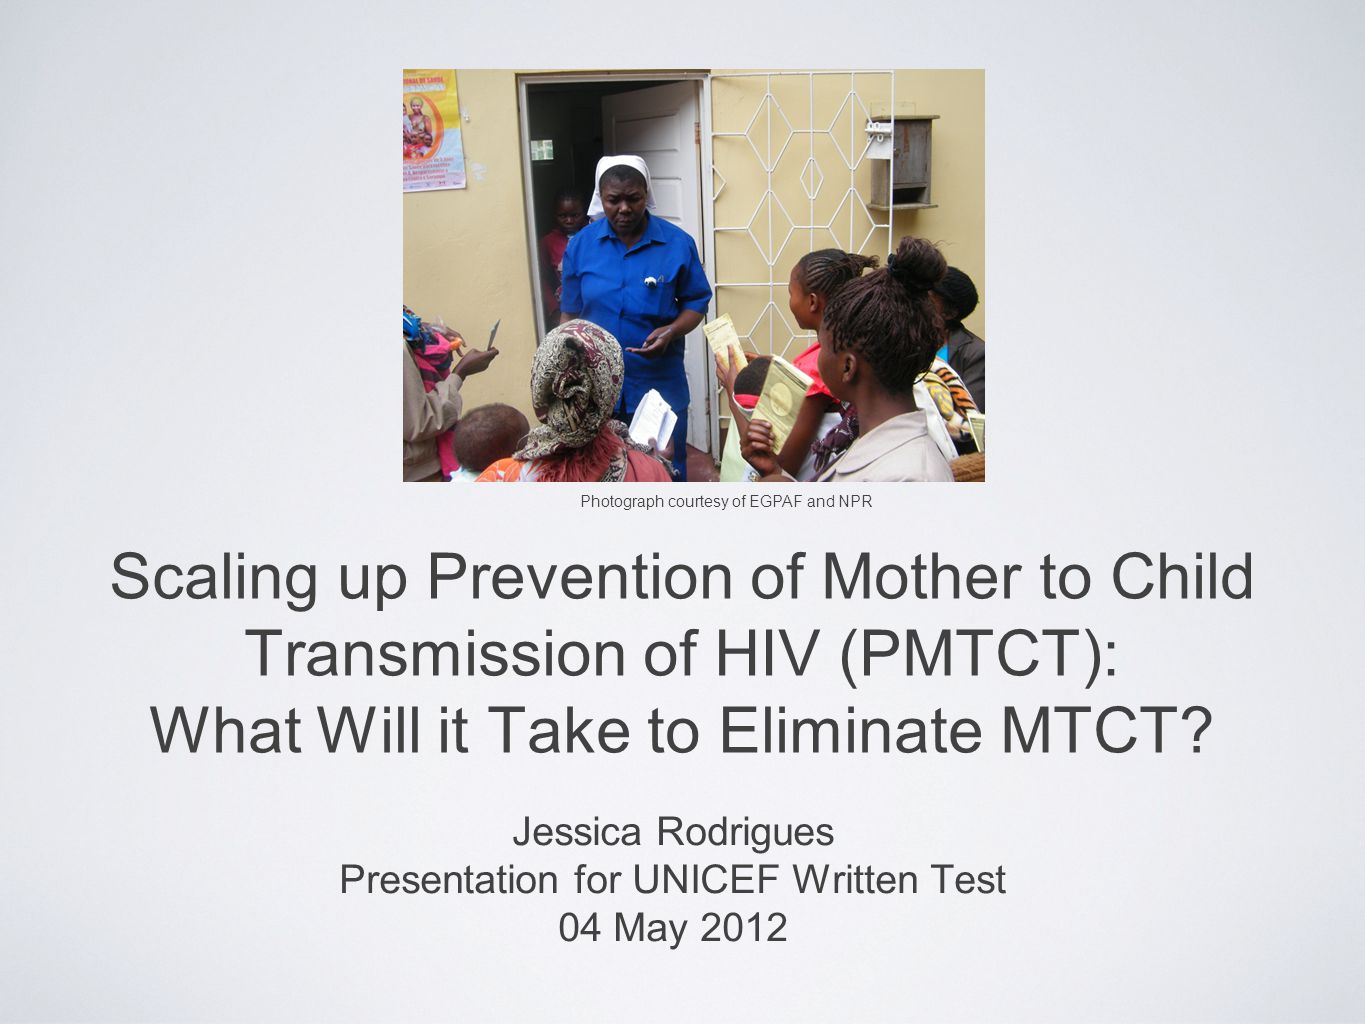 Scaling up Prevention of Mother to Child Transmission of HIV (PMTCT): What Will it Take to Eliminate MTCT.